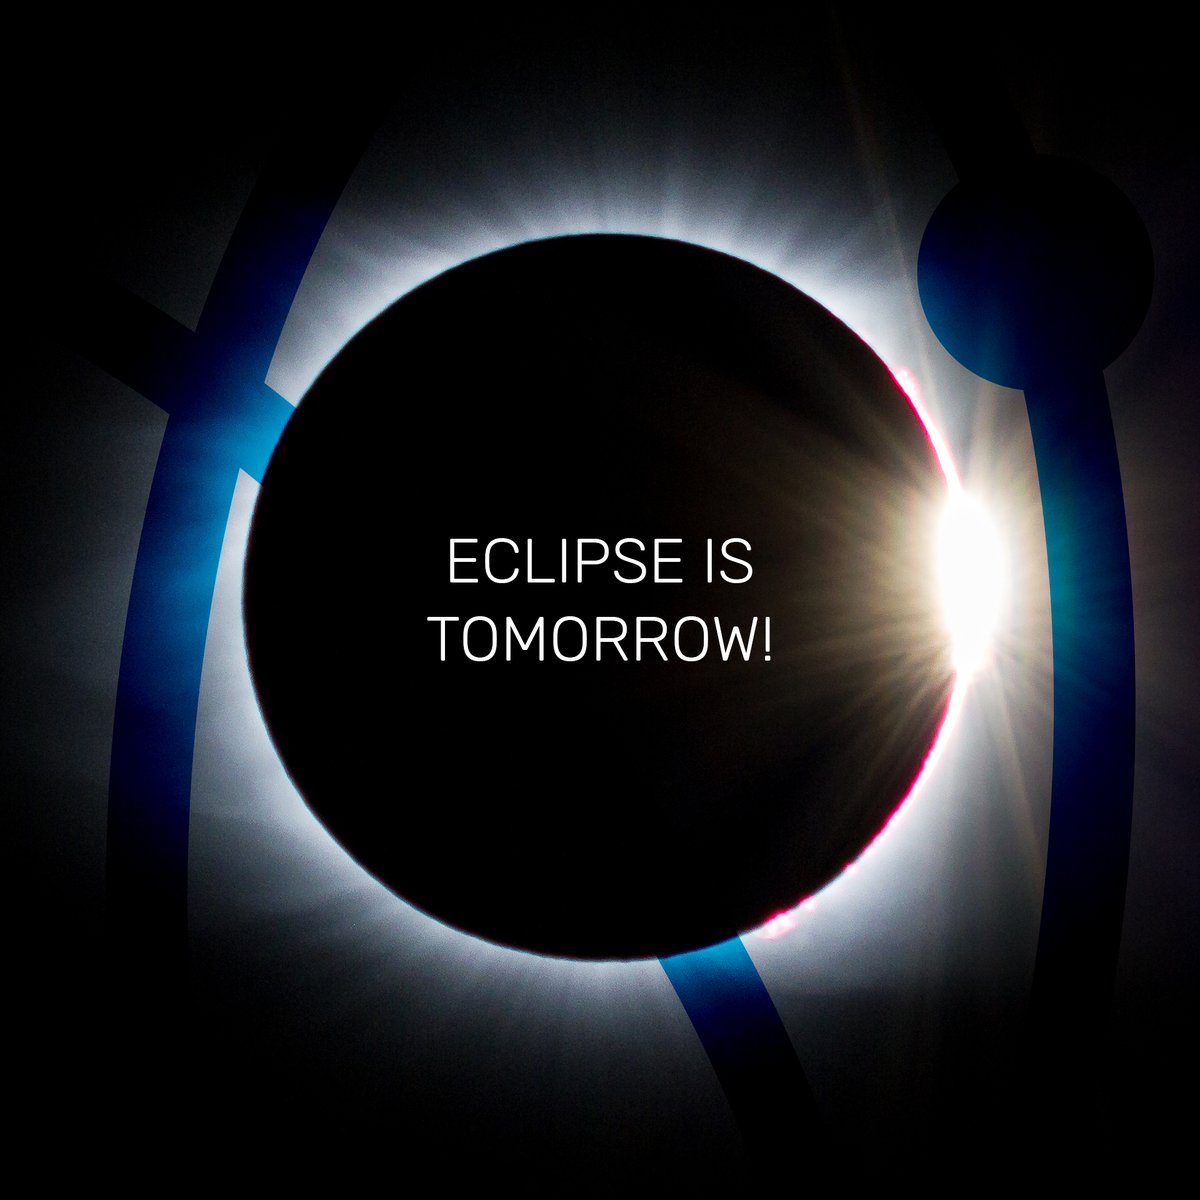 Get ready, sky-gazers! TOMORROW marks the celestial event we’ve all been waiting for – the solar eclipse! Get out your popcorn and eclipse glasses and settle in for a cosmic wonder. Share your eclipse plans in the comments and tell us what science wonders you hope to see! 🌑🔭